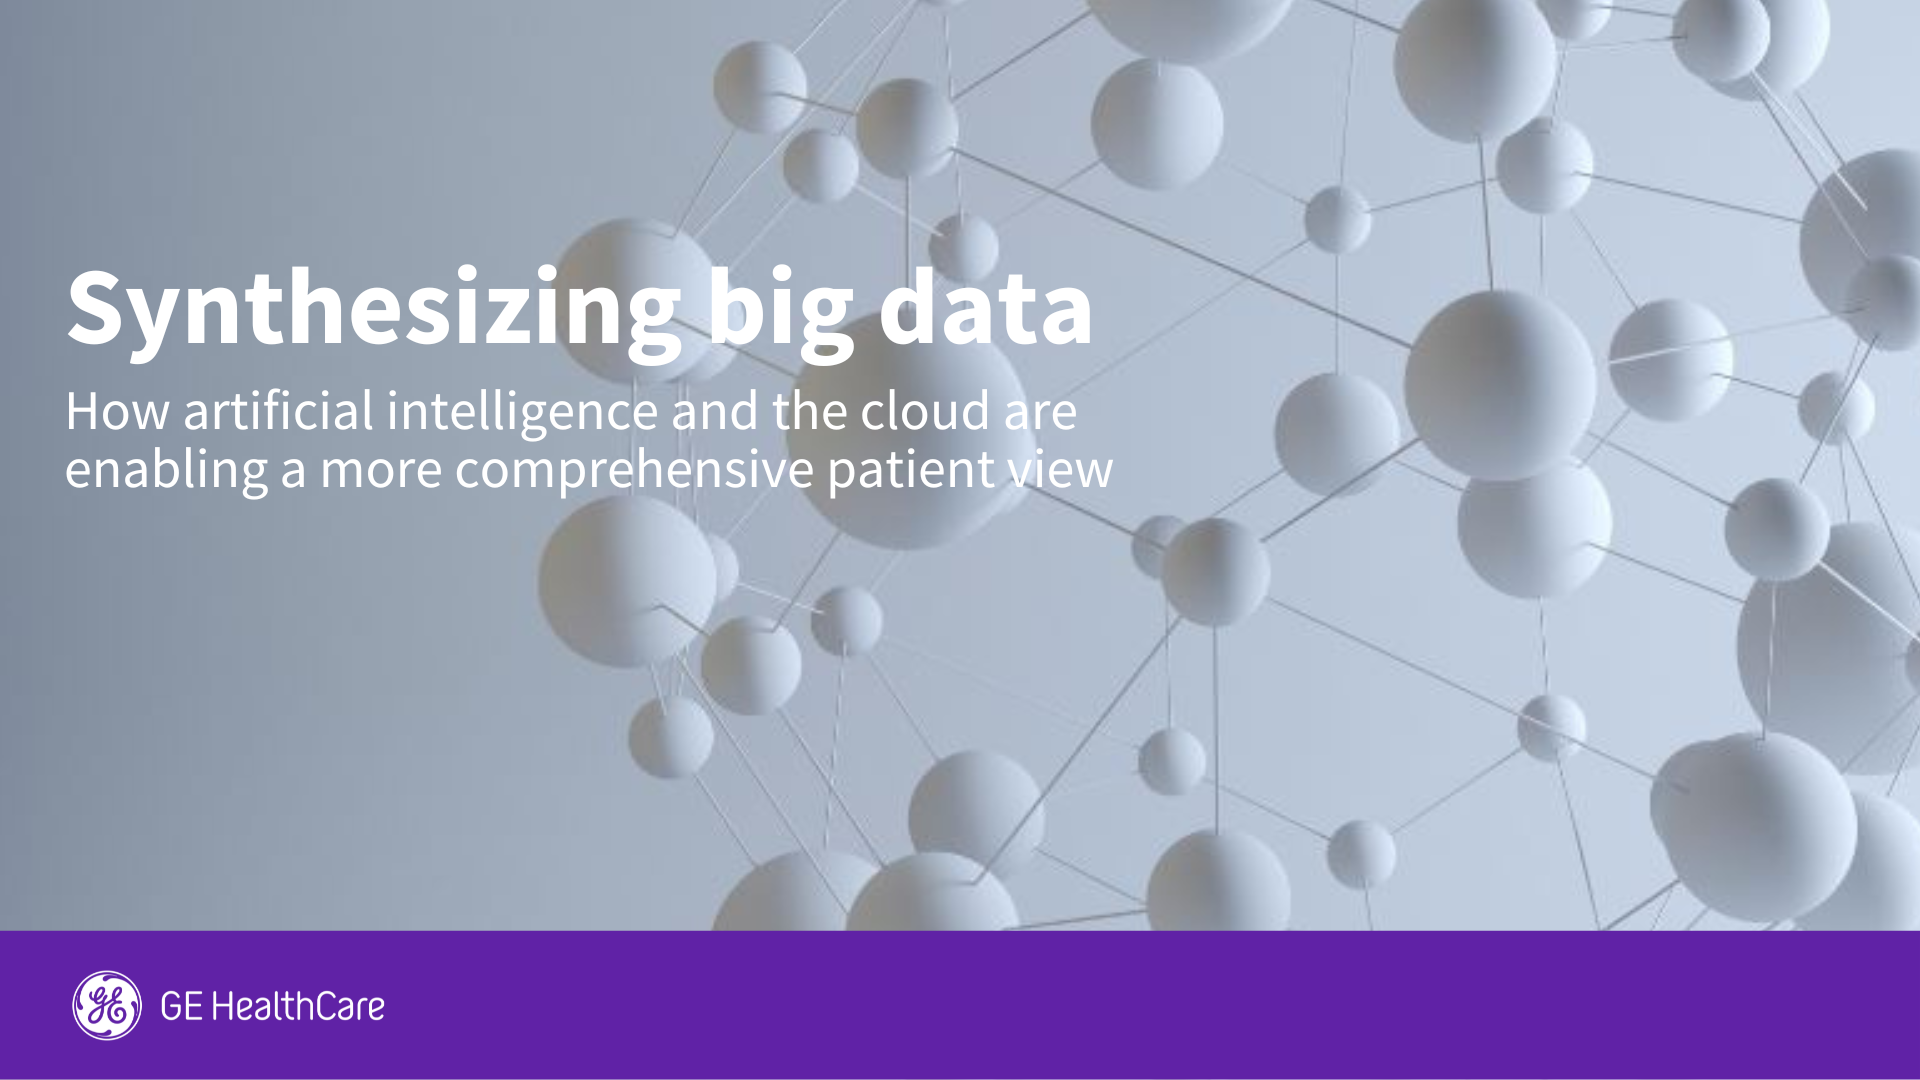 Synthesizing big data - hwo artificial intelligence and the cloud are enabling a more comprehensive patient view